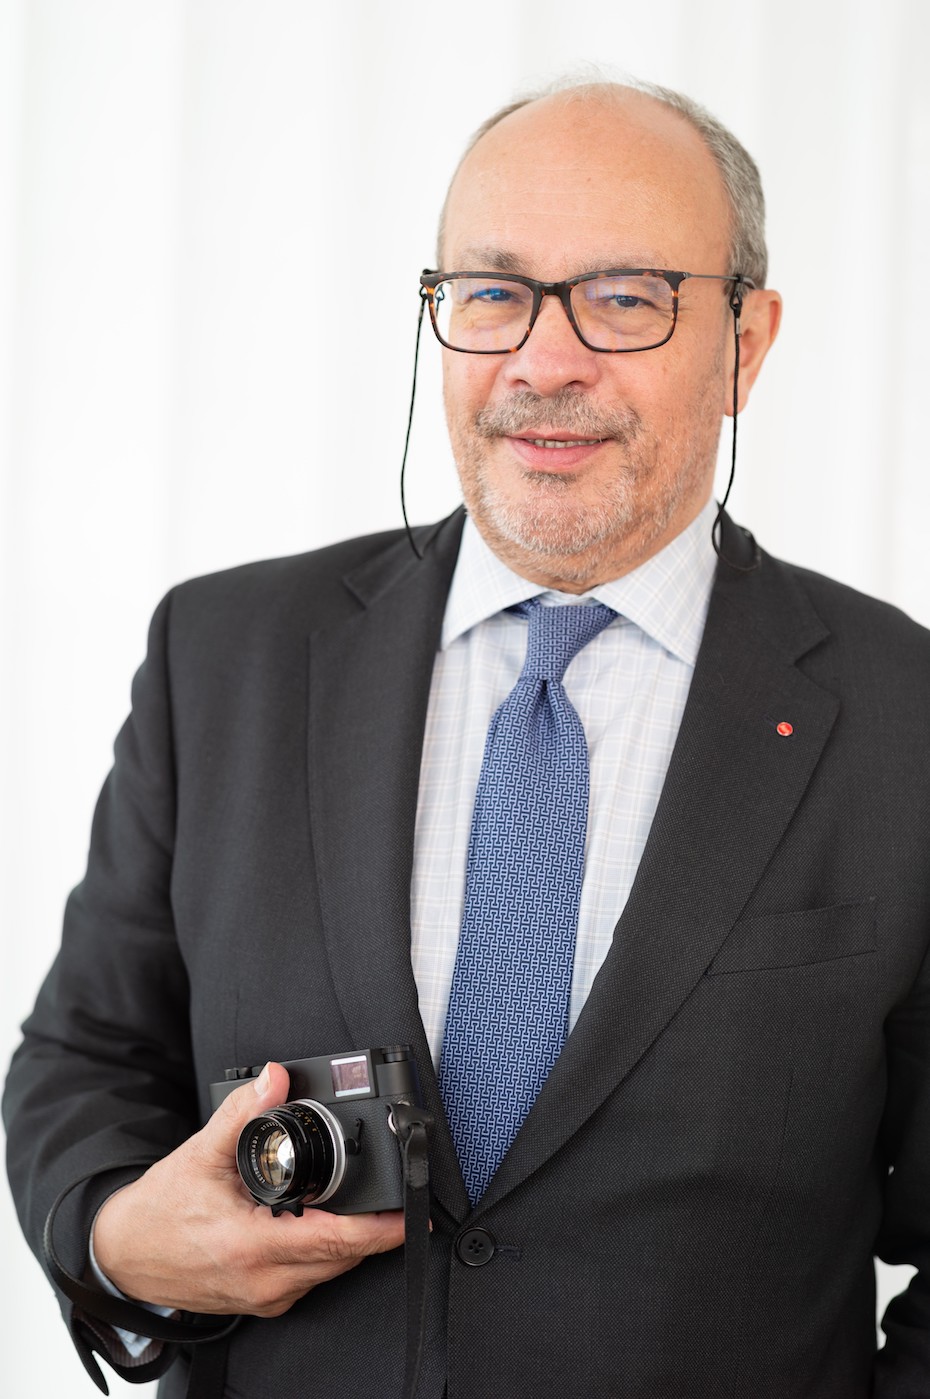 Dr. Andreas Kaufmann, Chairman of the Audit & Supervisory Board of Leica Camera AG